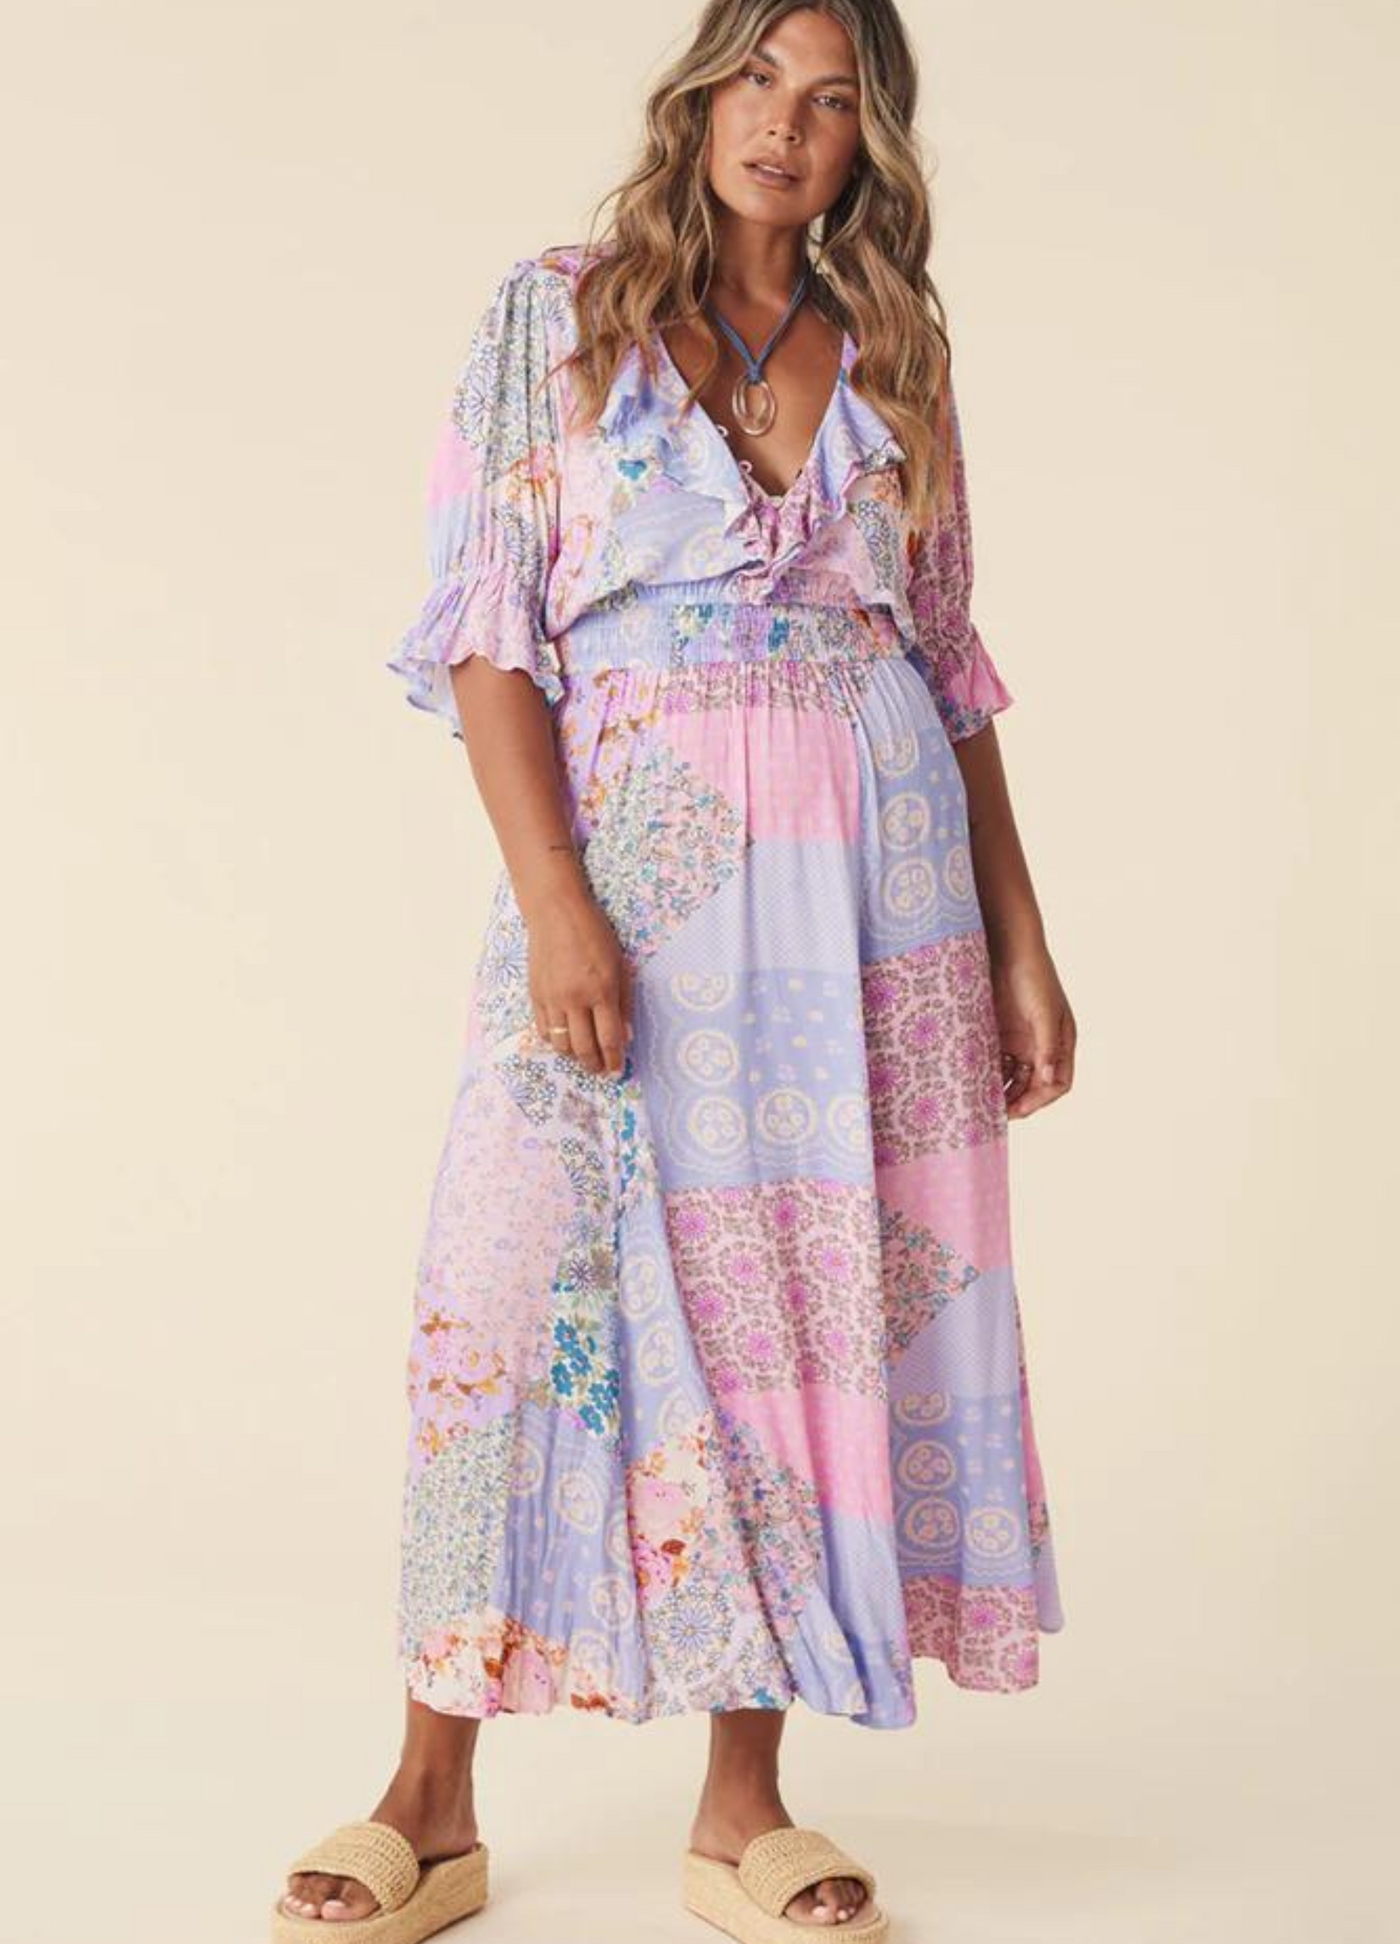 Model wearing the pastel print jacaranda gown from Spell (cha cha collection) 